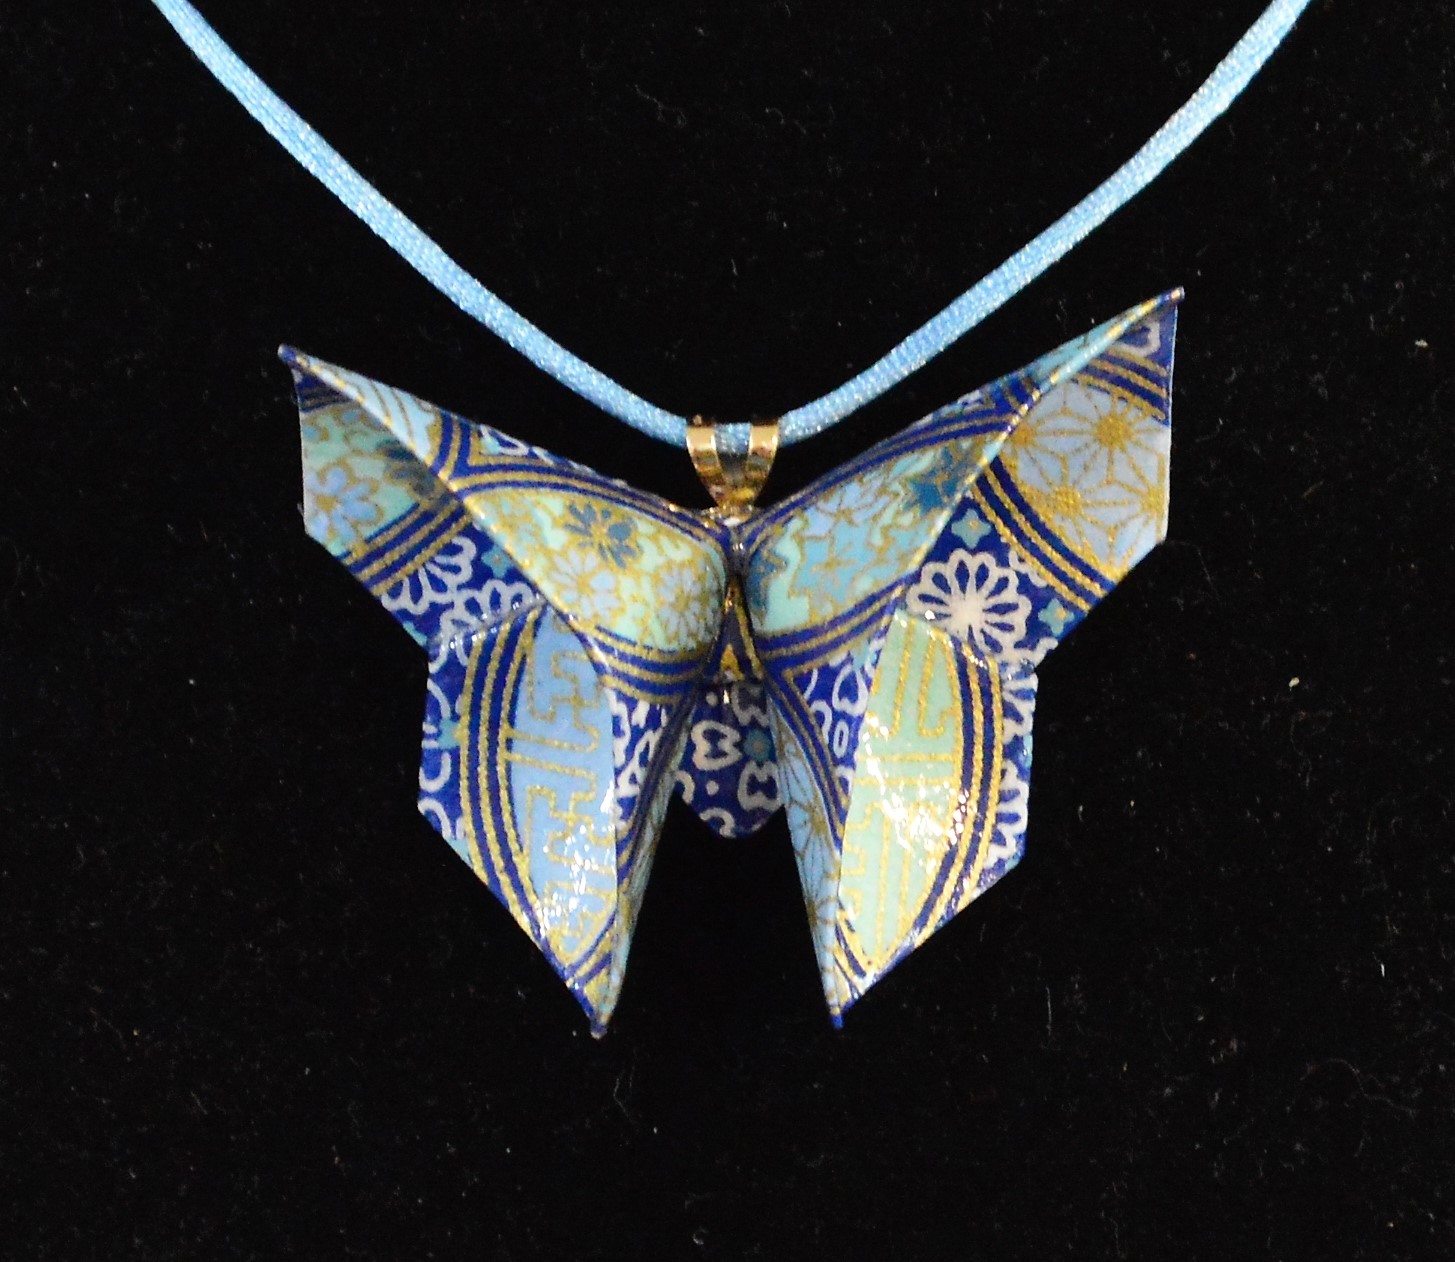 Rich Gray
Blue Origami Butterfly Necklace
Paper  2 x 2.5 inches
Origami butterfly folded from paper with shades of blue and gold highlights.  Coated with clear acrylic sealants for durability and hung on an 18 inch blue cord.